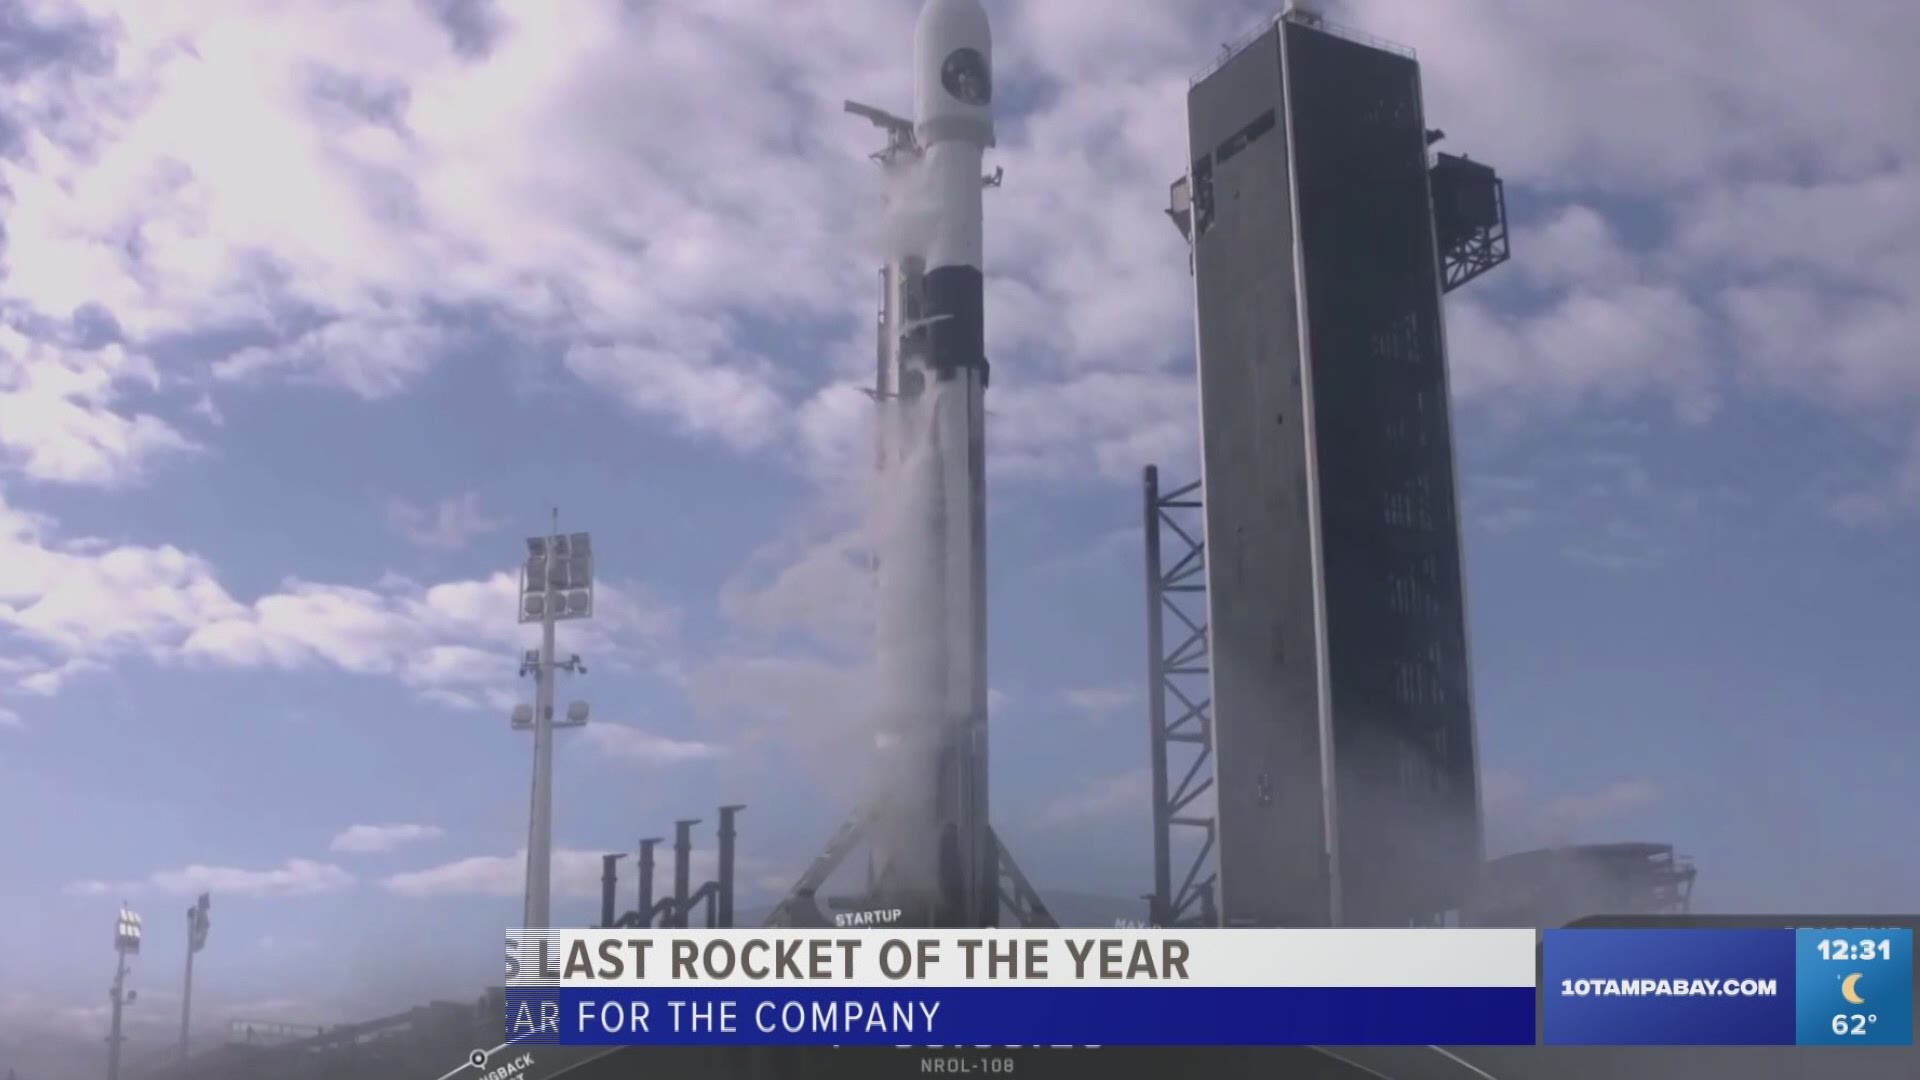 The Falcon 9 rocket carried a secret satellite to space from Kennedy Space Center in Florida.